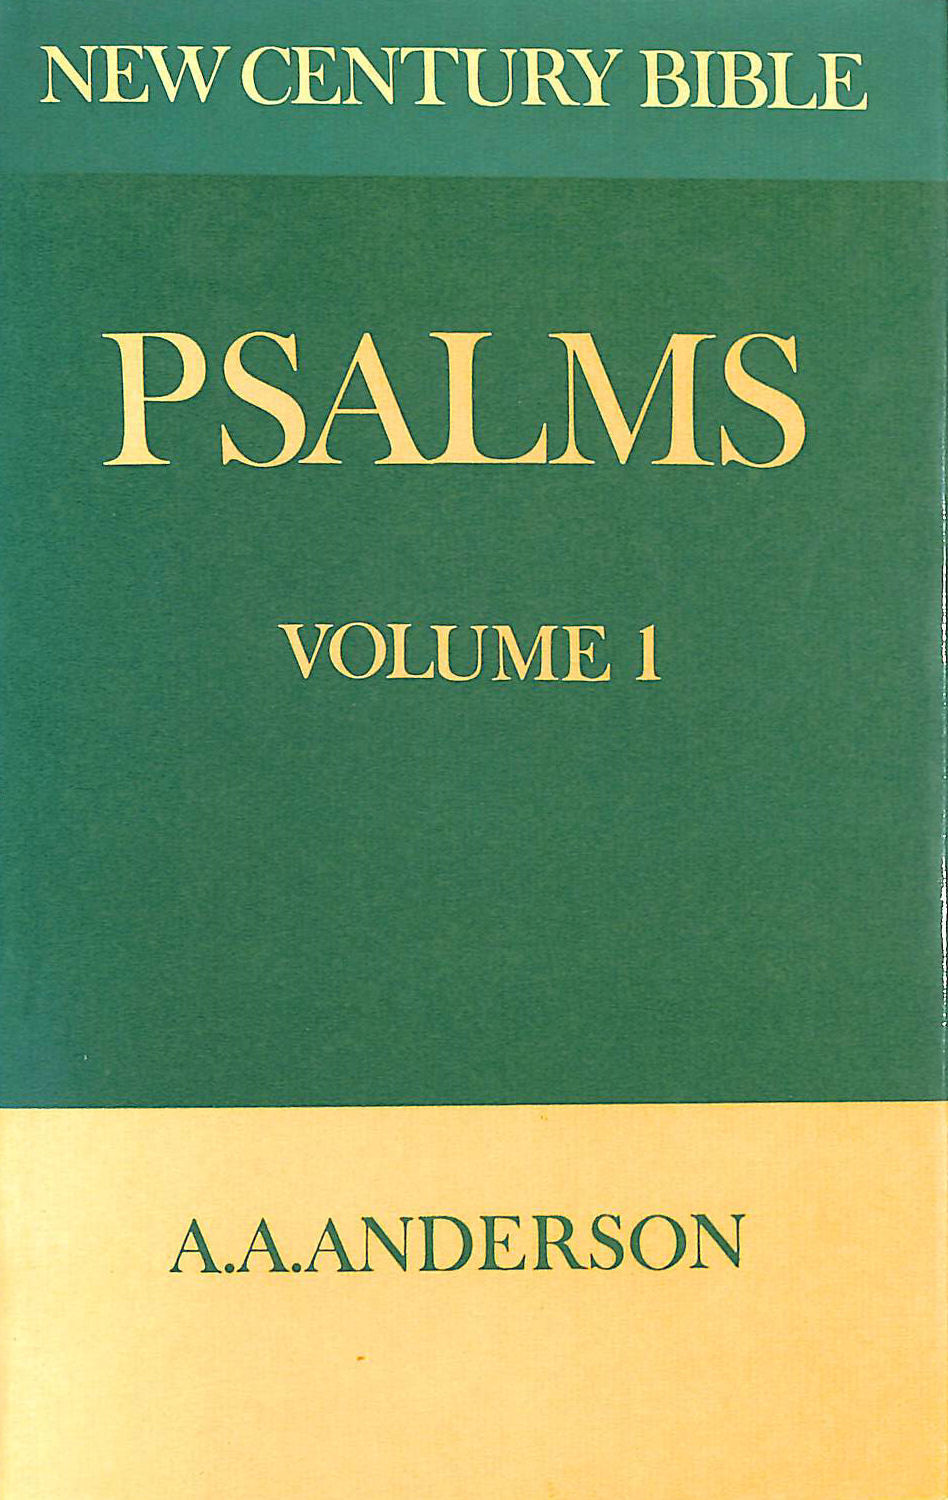 ANDERSON, A. A - The Book of Psalms Vol 1. (1-72) (New century Bible)